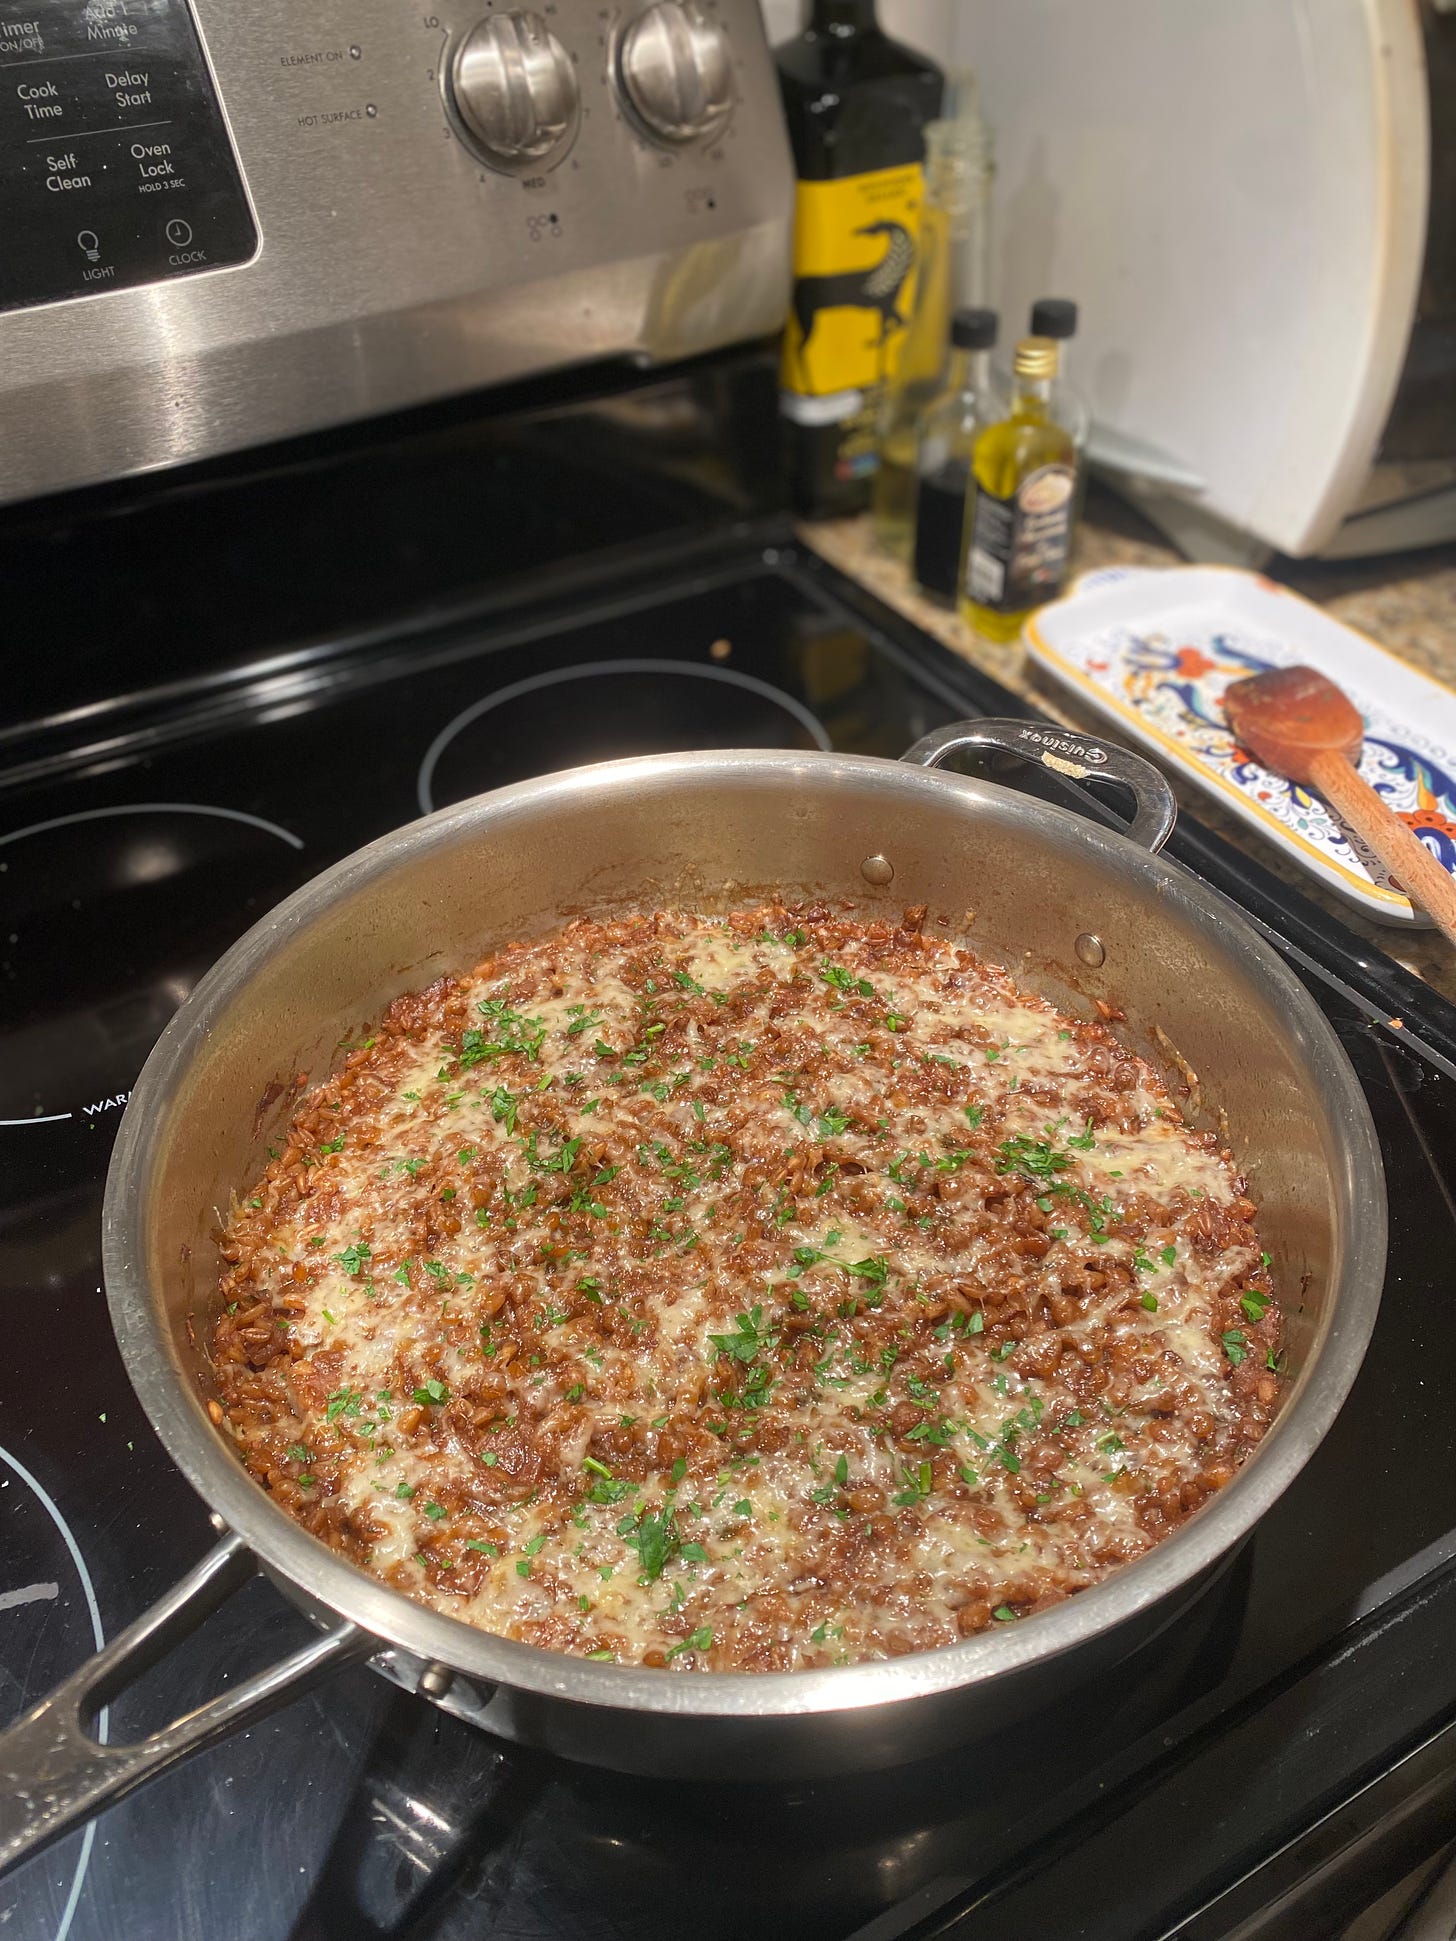 On top of the stove, a 12" steel pan full of the lentil farro stew described above. It has cheese melted over the top and sprinkles of parsley. Next to the stove is a spoon on its rest.